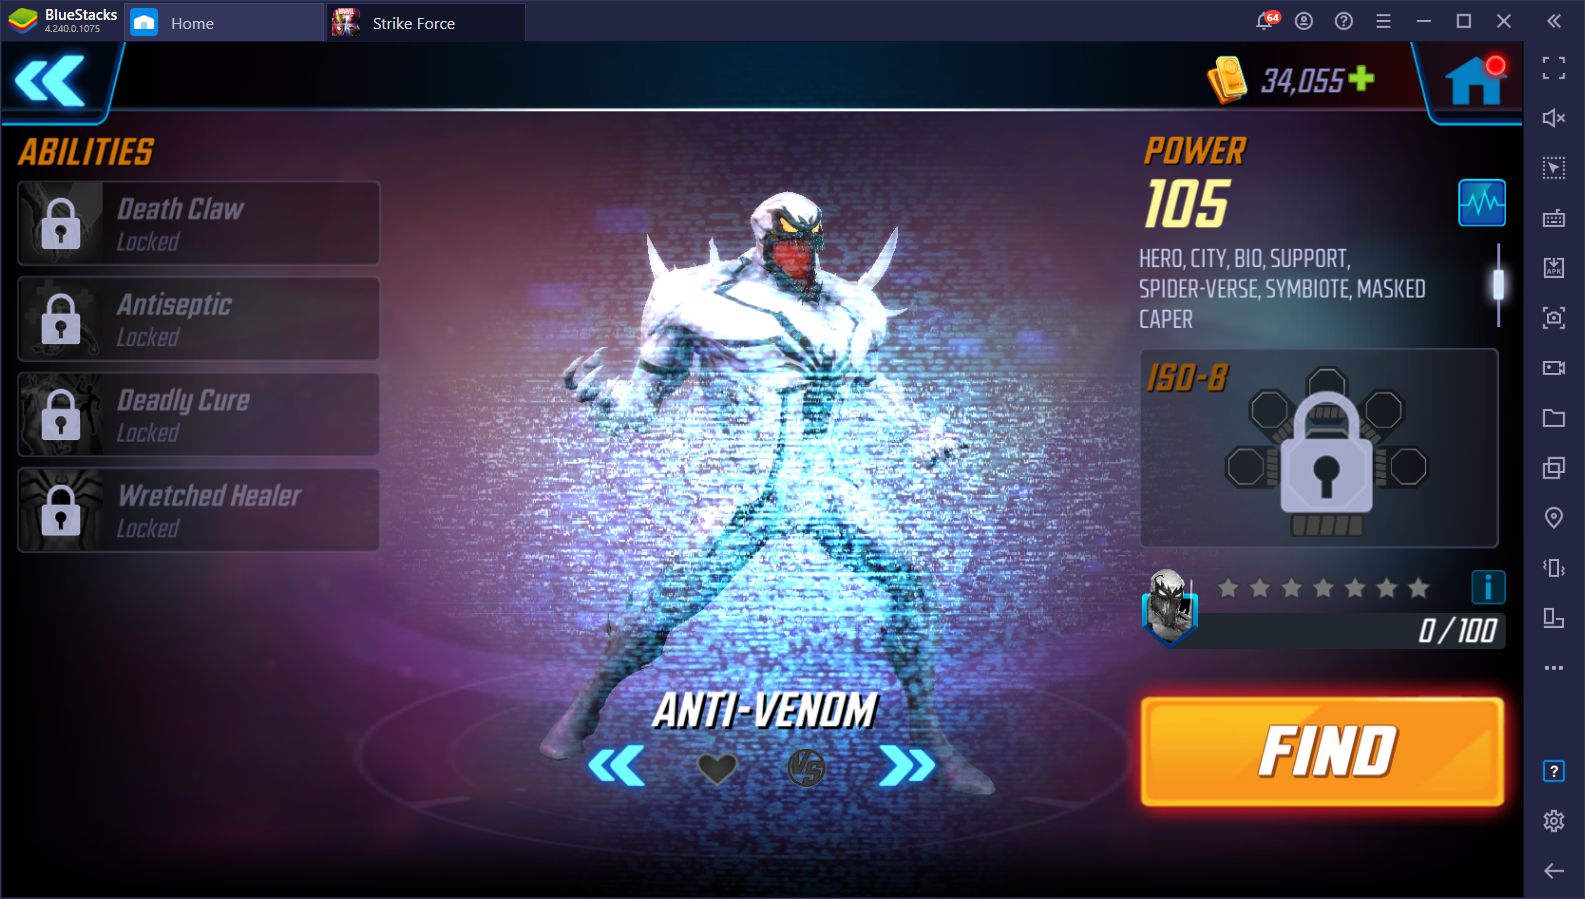 MARVEL Strike Force Halloween Update Introduces ‘Anti-Venom’ and Other Interesting Events